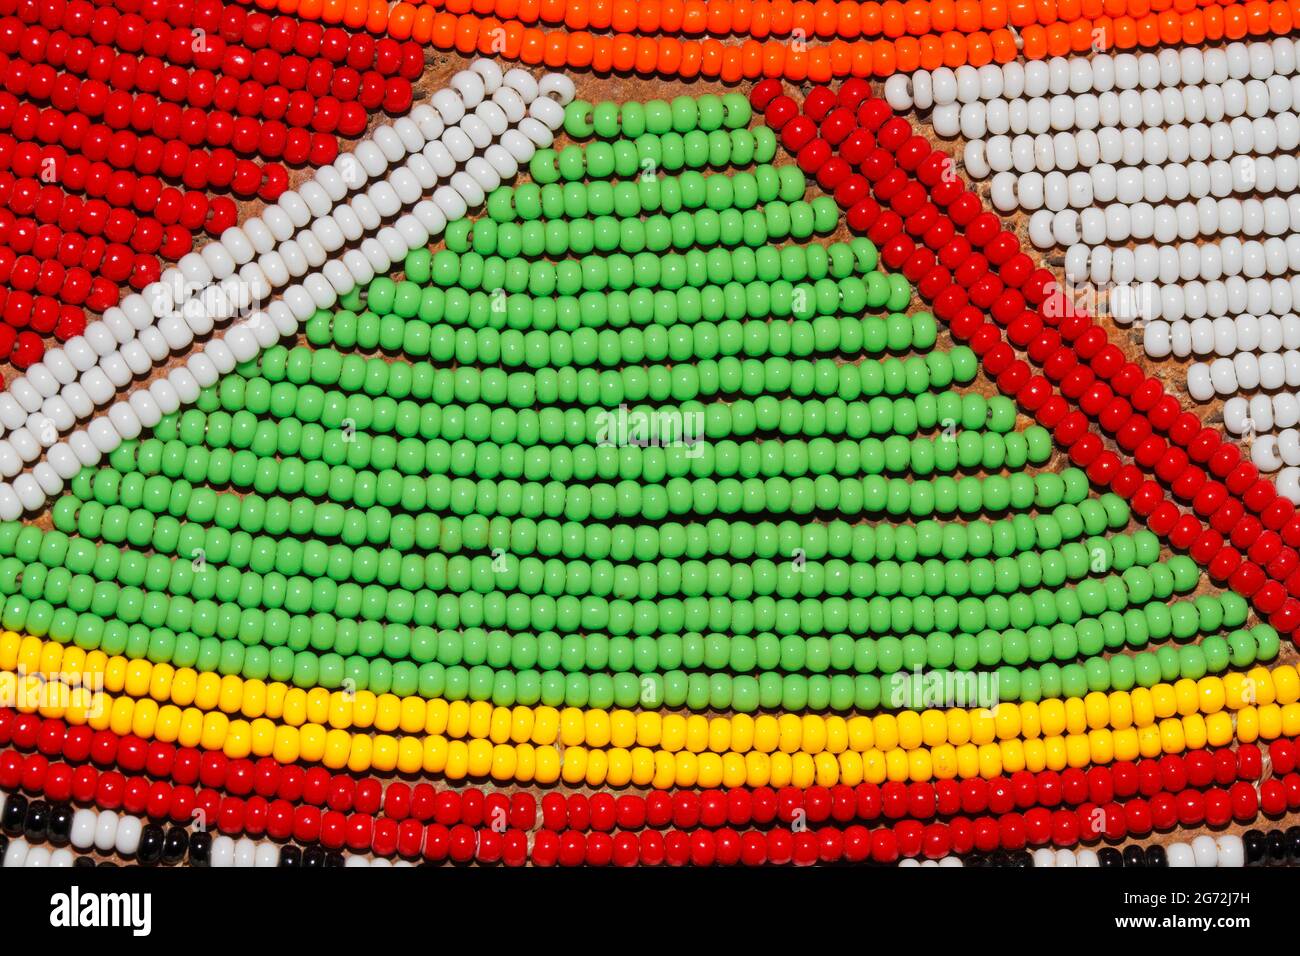 Background of colorful African beads used as decoration by the Masai tribe in Kenya Stock Photo